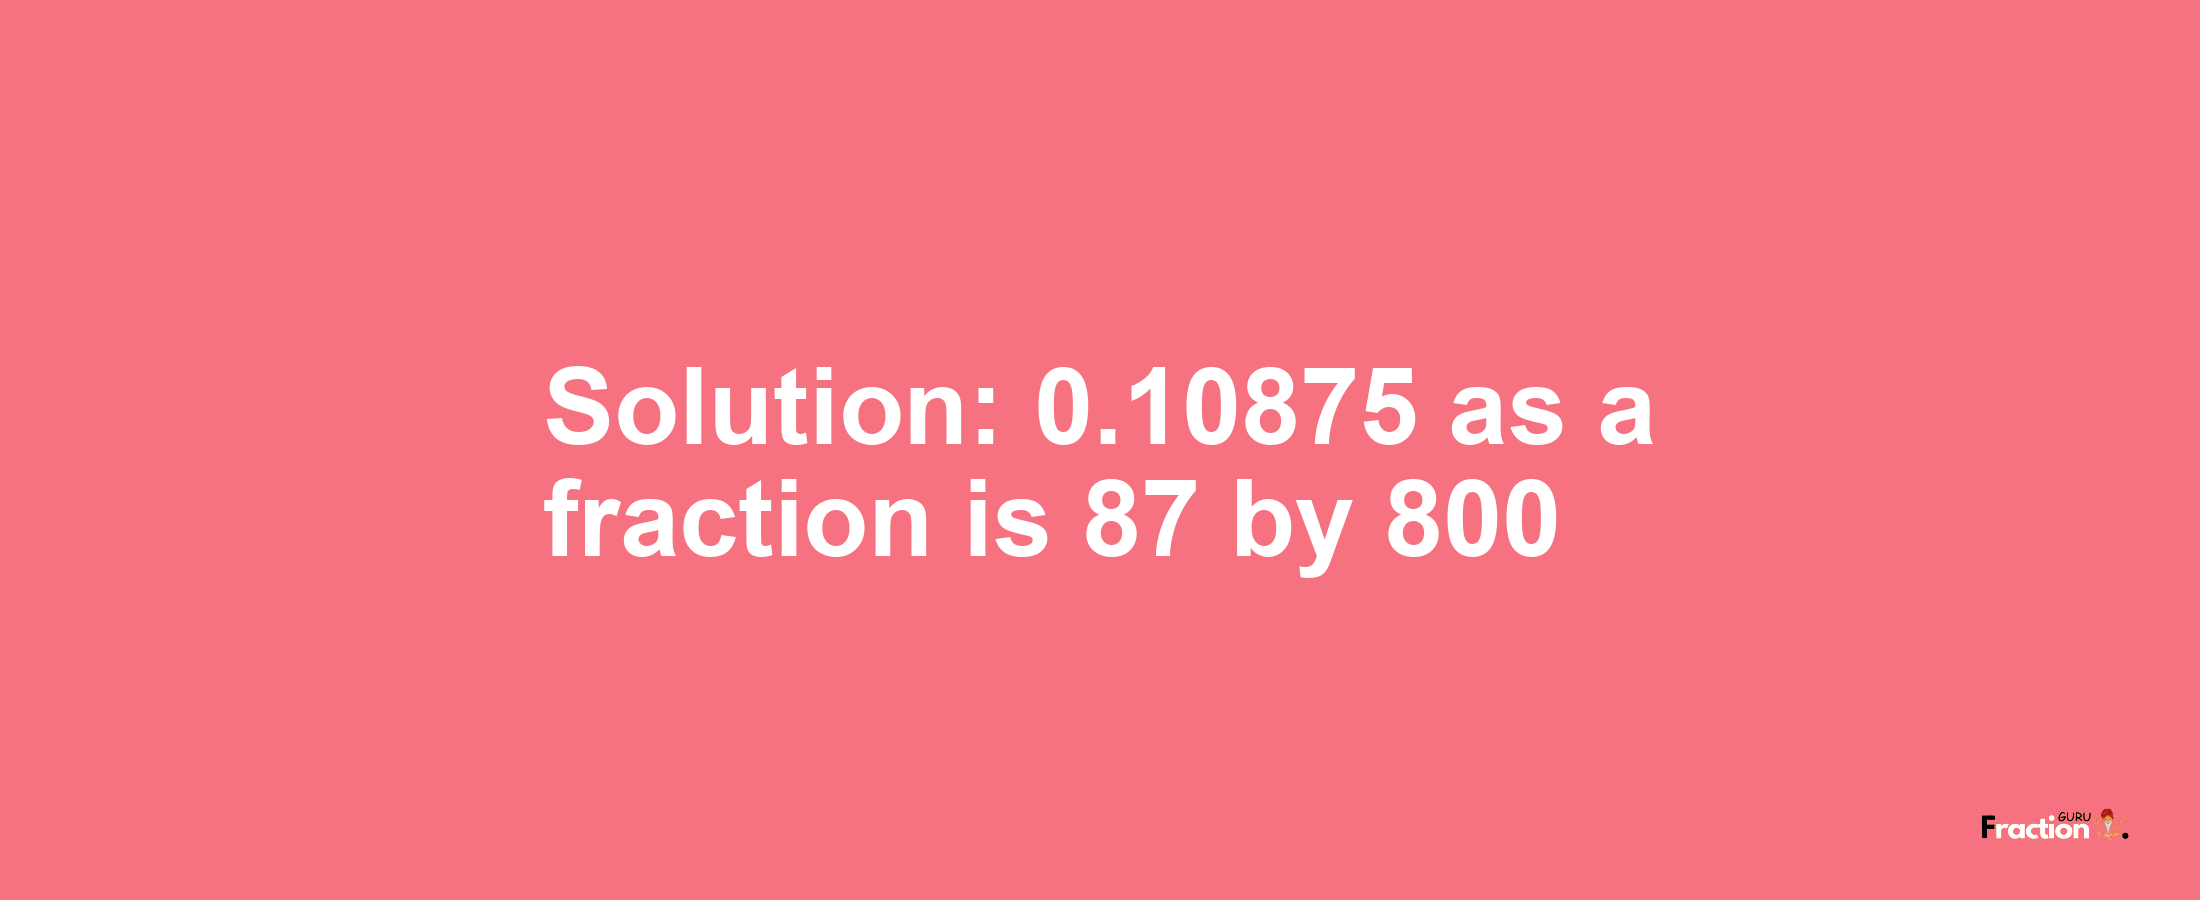 Solution:0.10875 as a fraction is 87/800